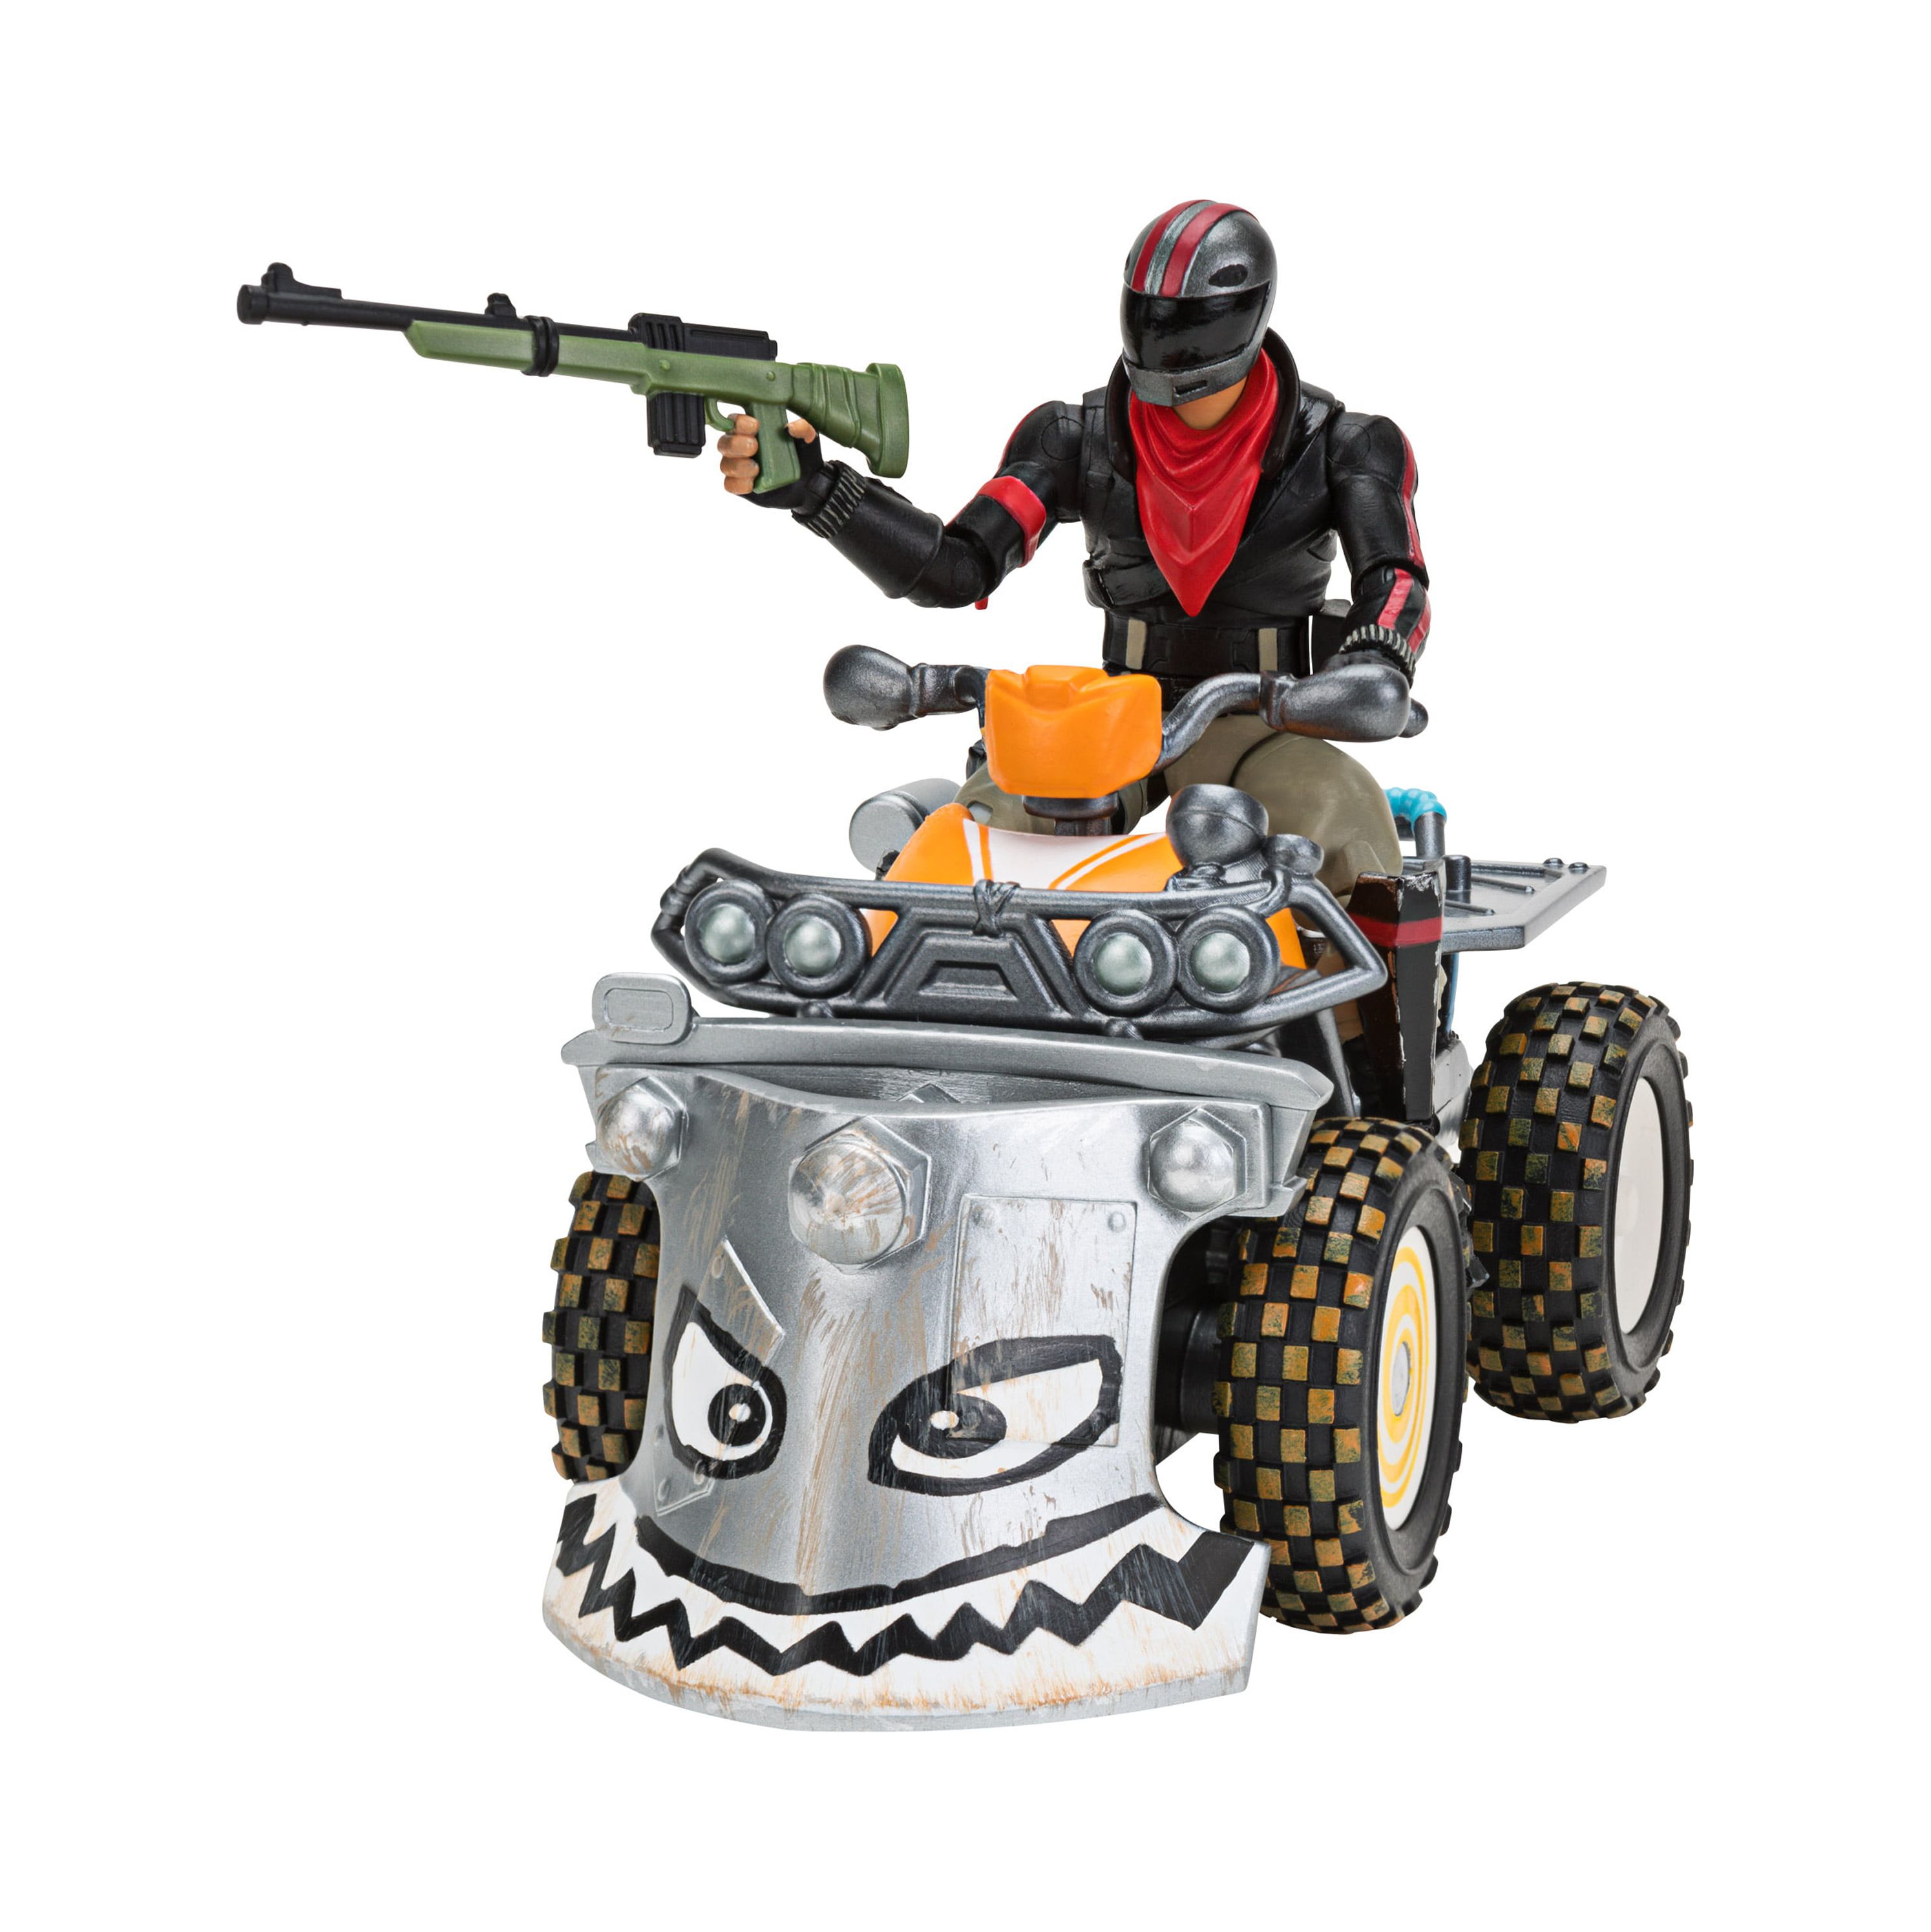 Fortnite Quadcrasher Vehicle with Burnout 4-inch Action Figure Included - image 2 of 13